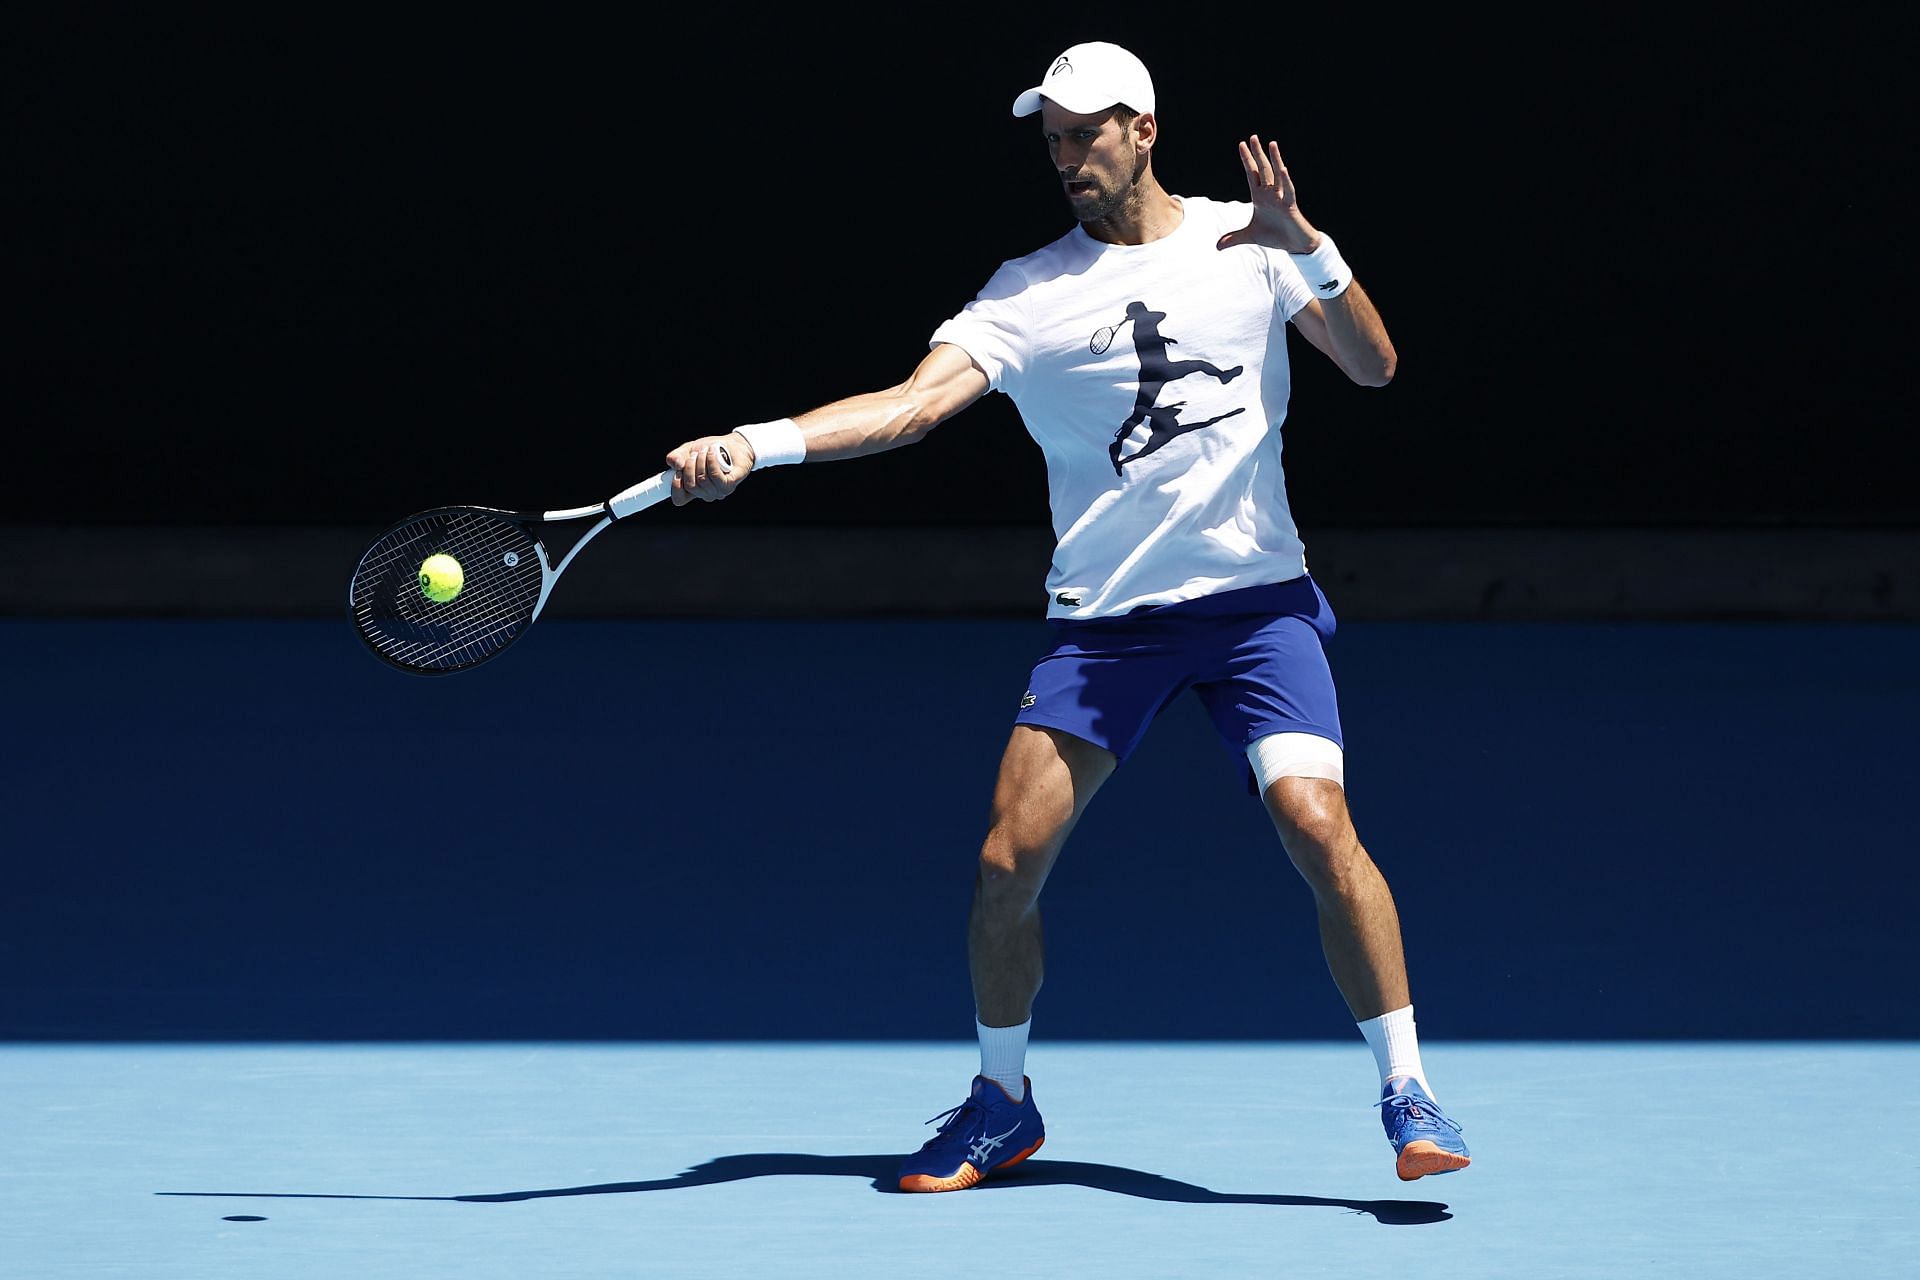 Novak Djokovic plays a forehand shot during a practice session ahead of the 2023 Australian Open